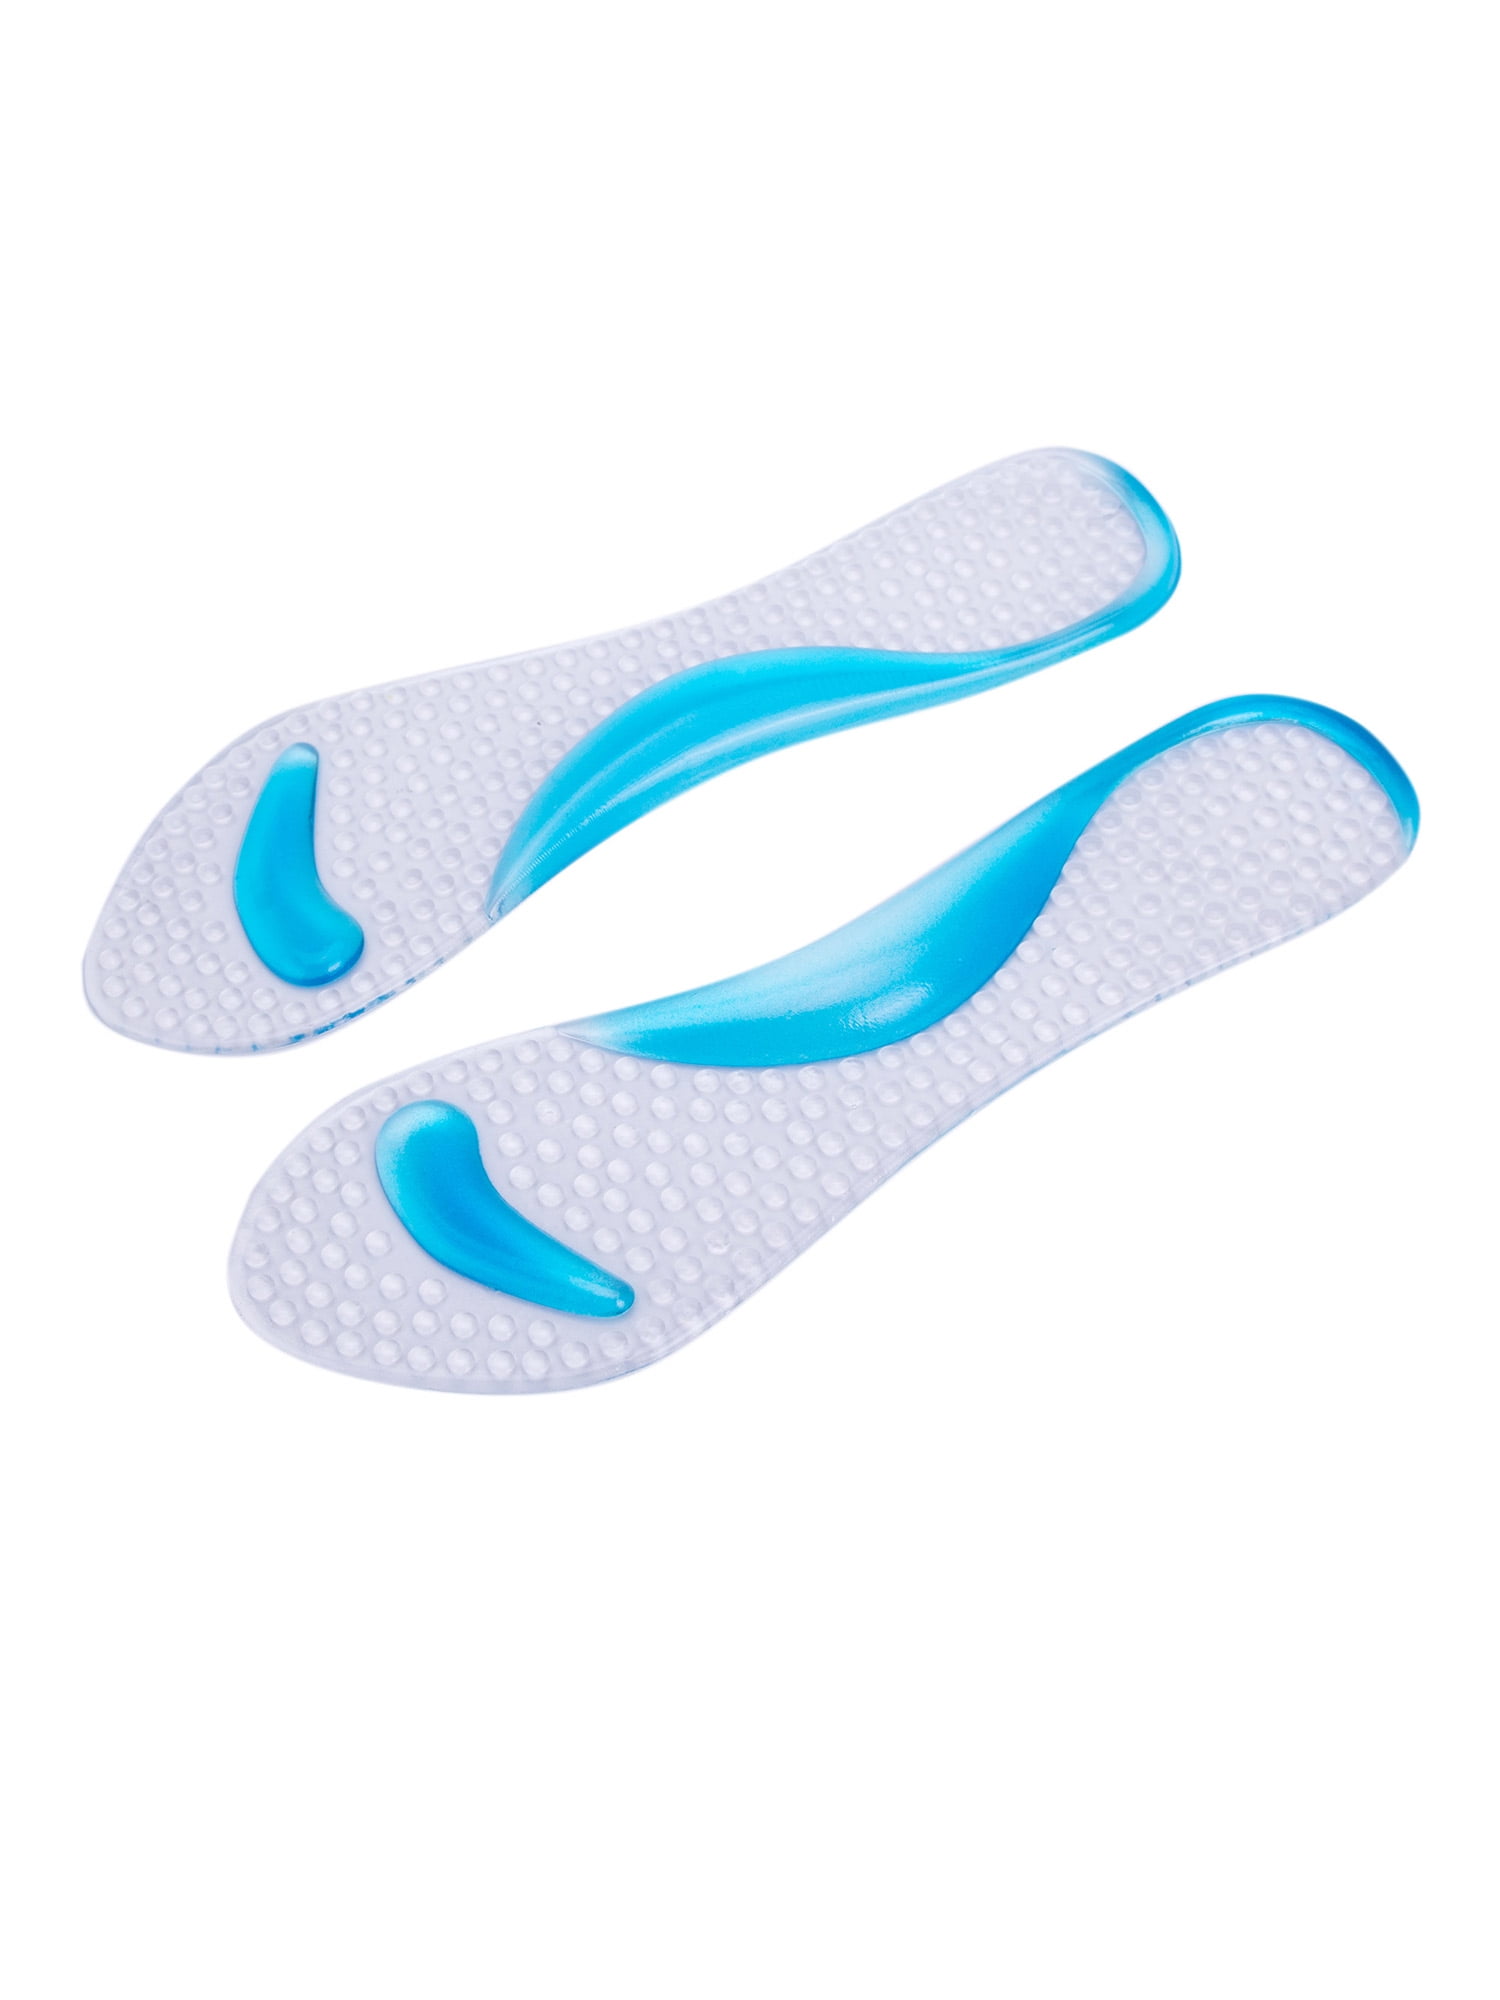 Heel Foot Cushion&Pad 3&4 Insole Shoe pad For Women Orthotic Arch Support JKHWC 